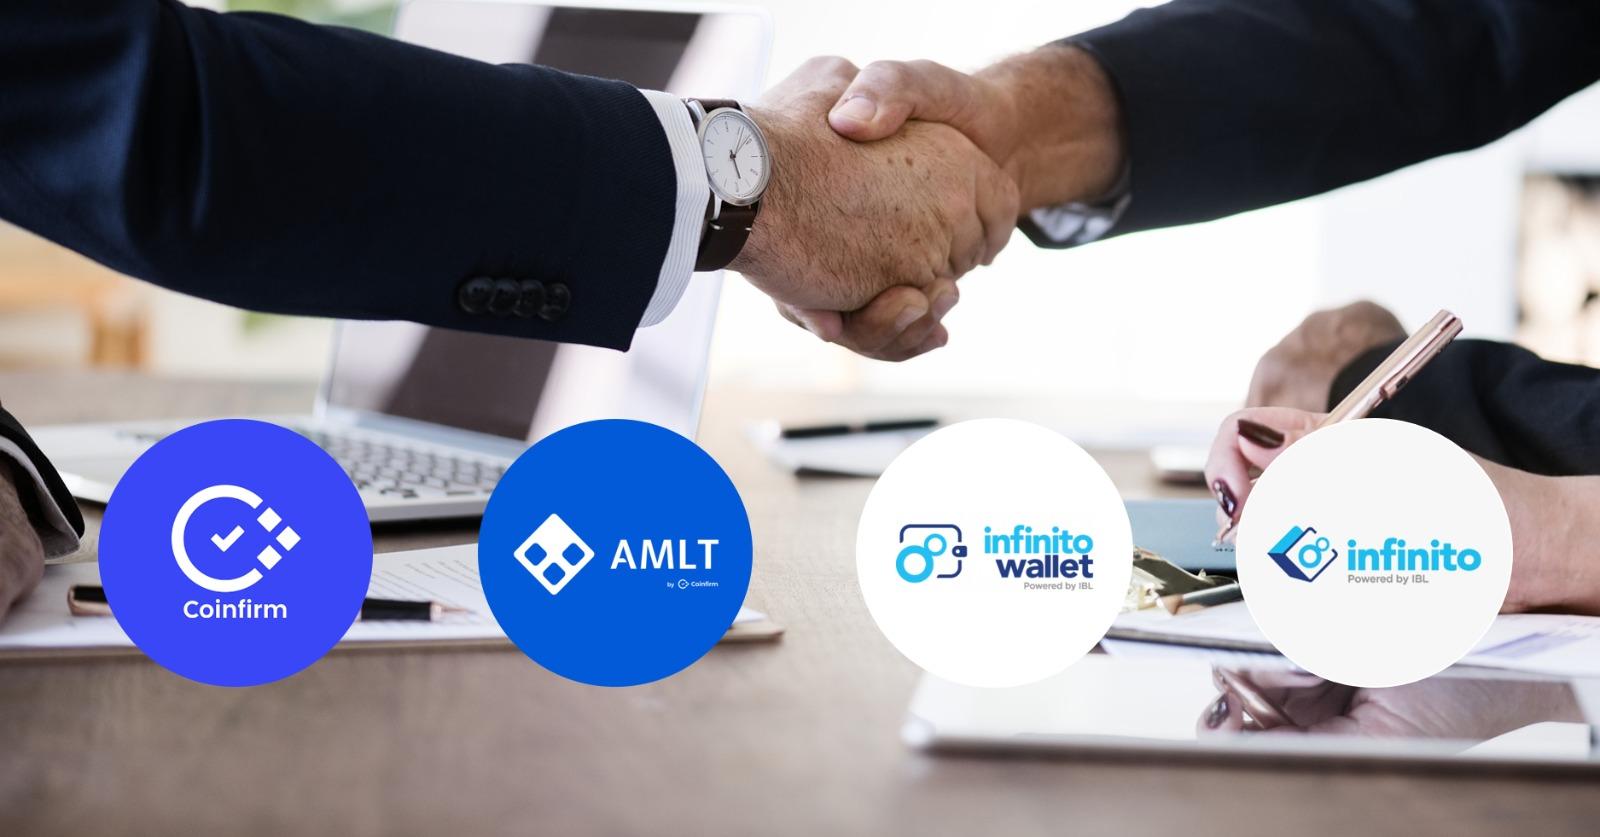 Universal cryptocurrency wallet Infinito Wallet integrates Coinfirm AML Platform and allows users to check risk rating of counterparties